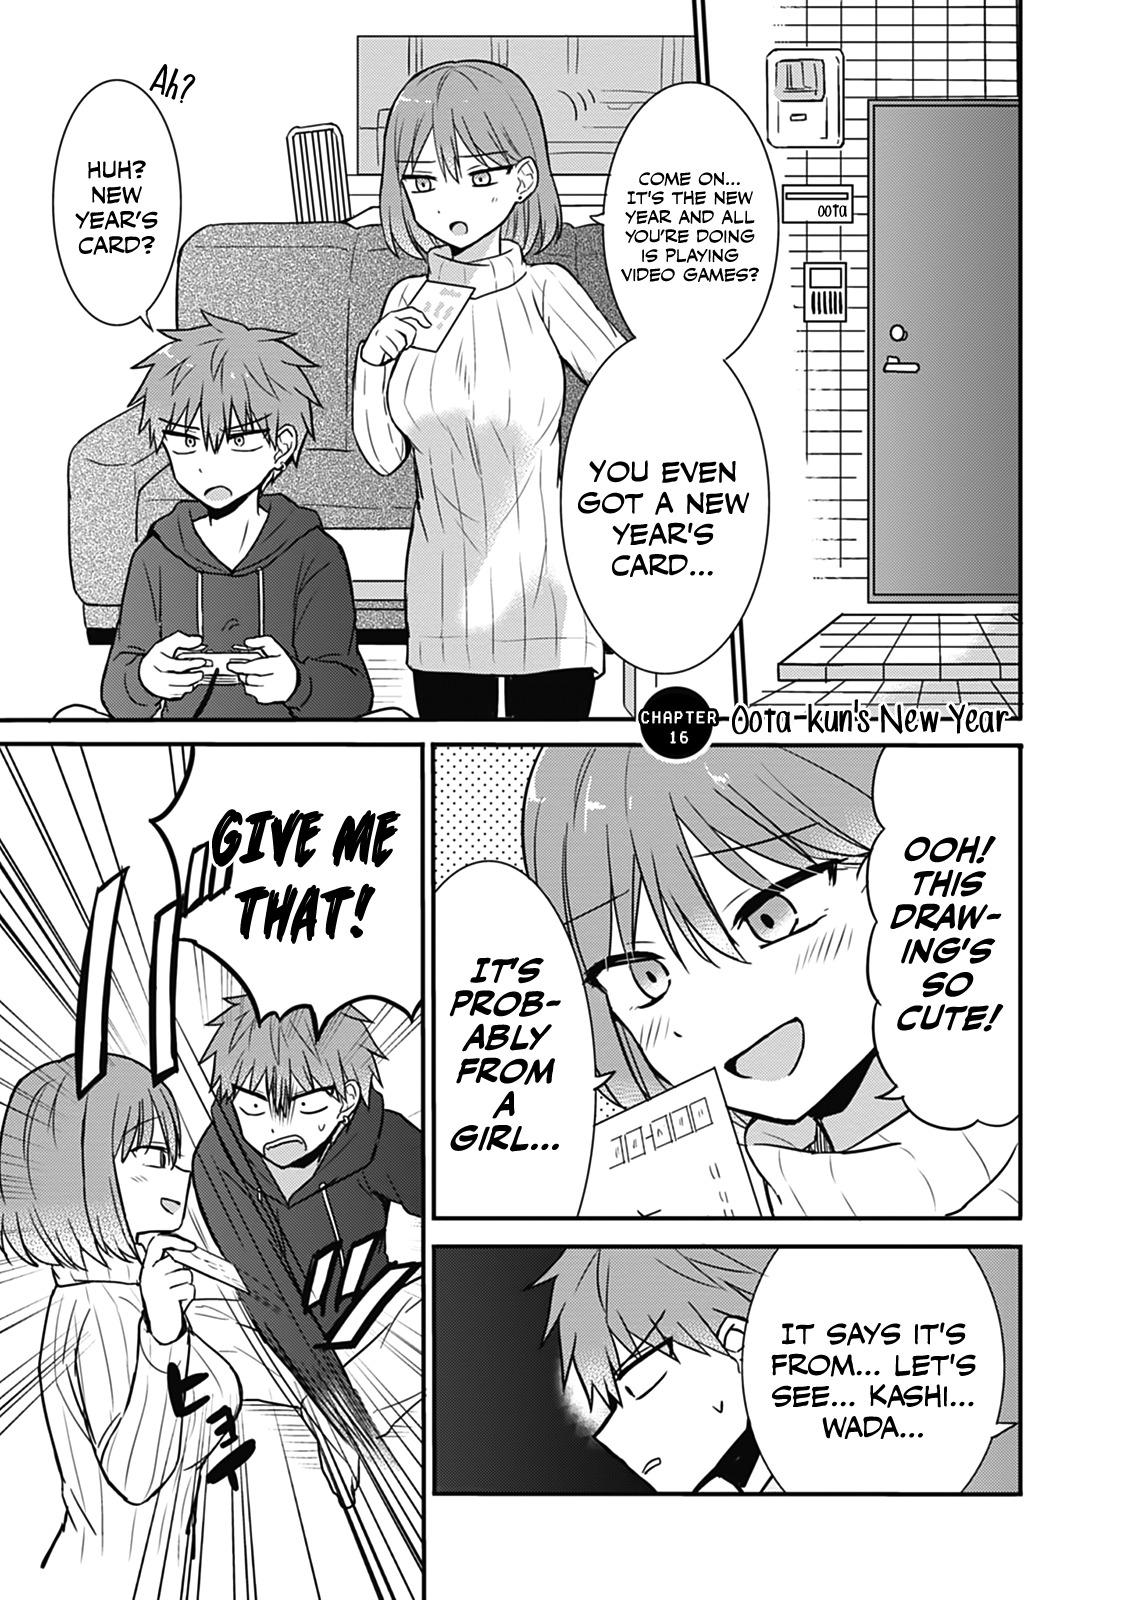 Expressionless Face Girl and Emotional Face Boy vol.2 ch.16